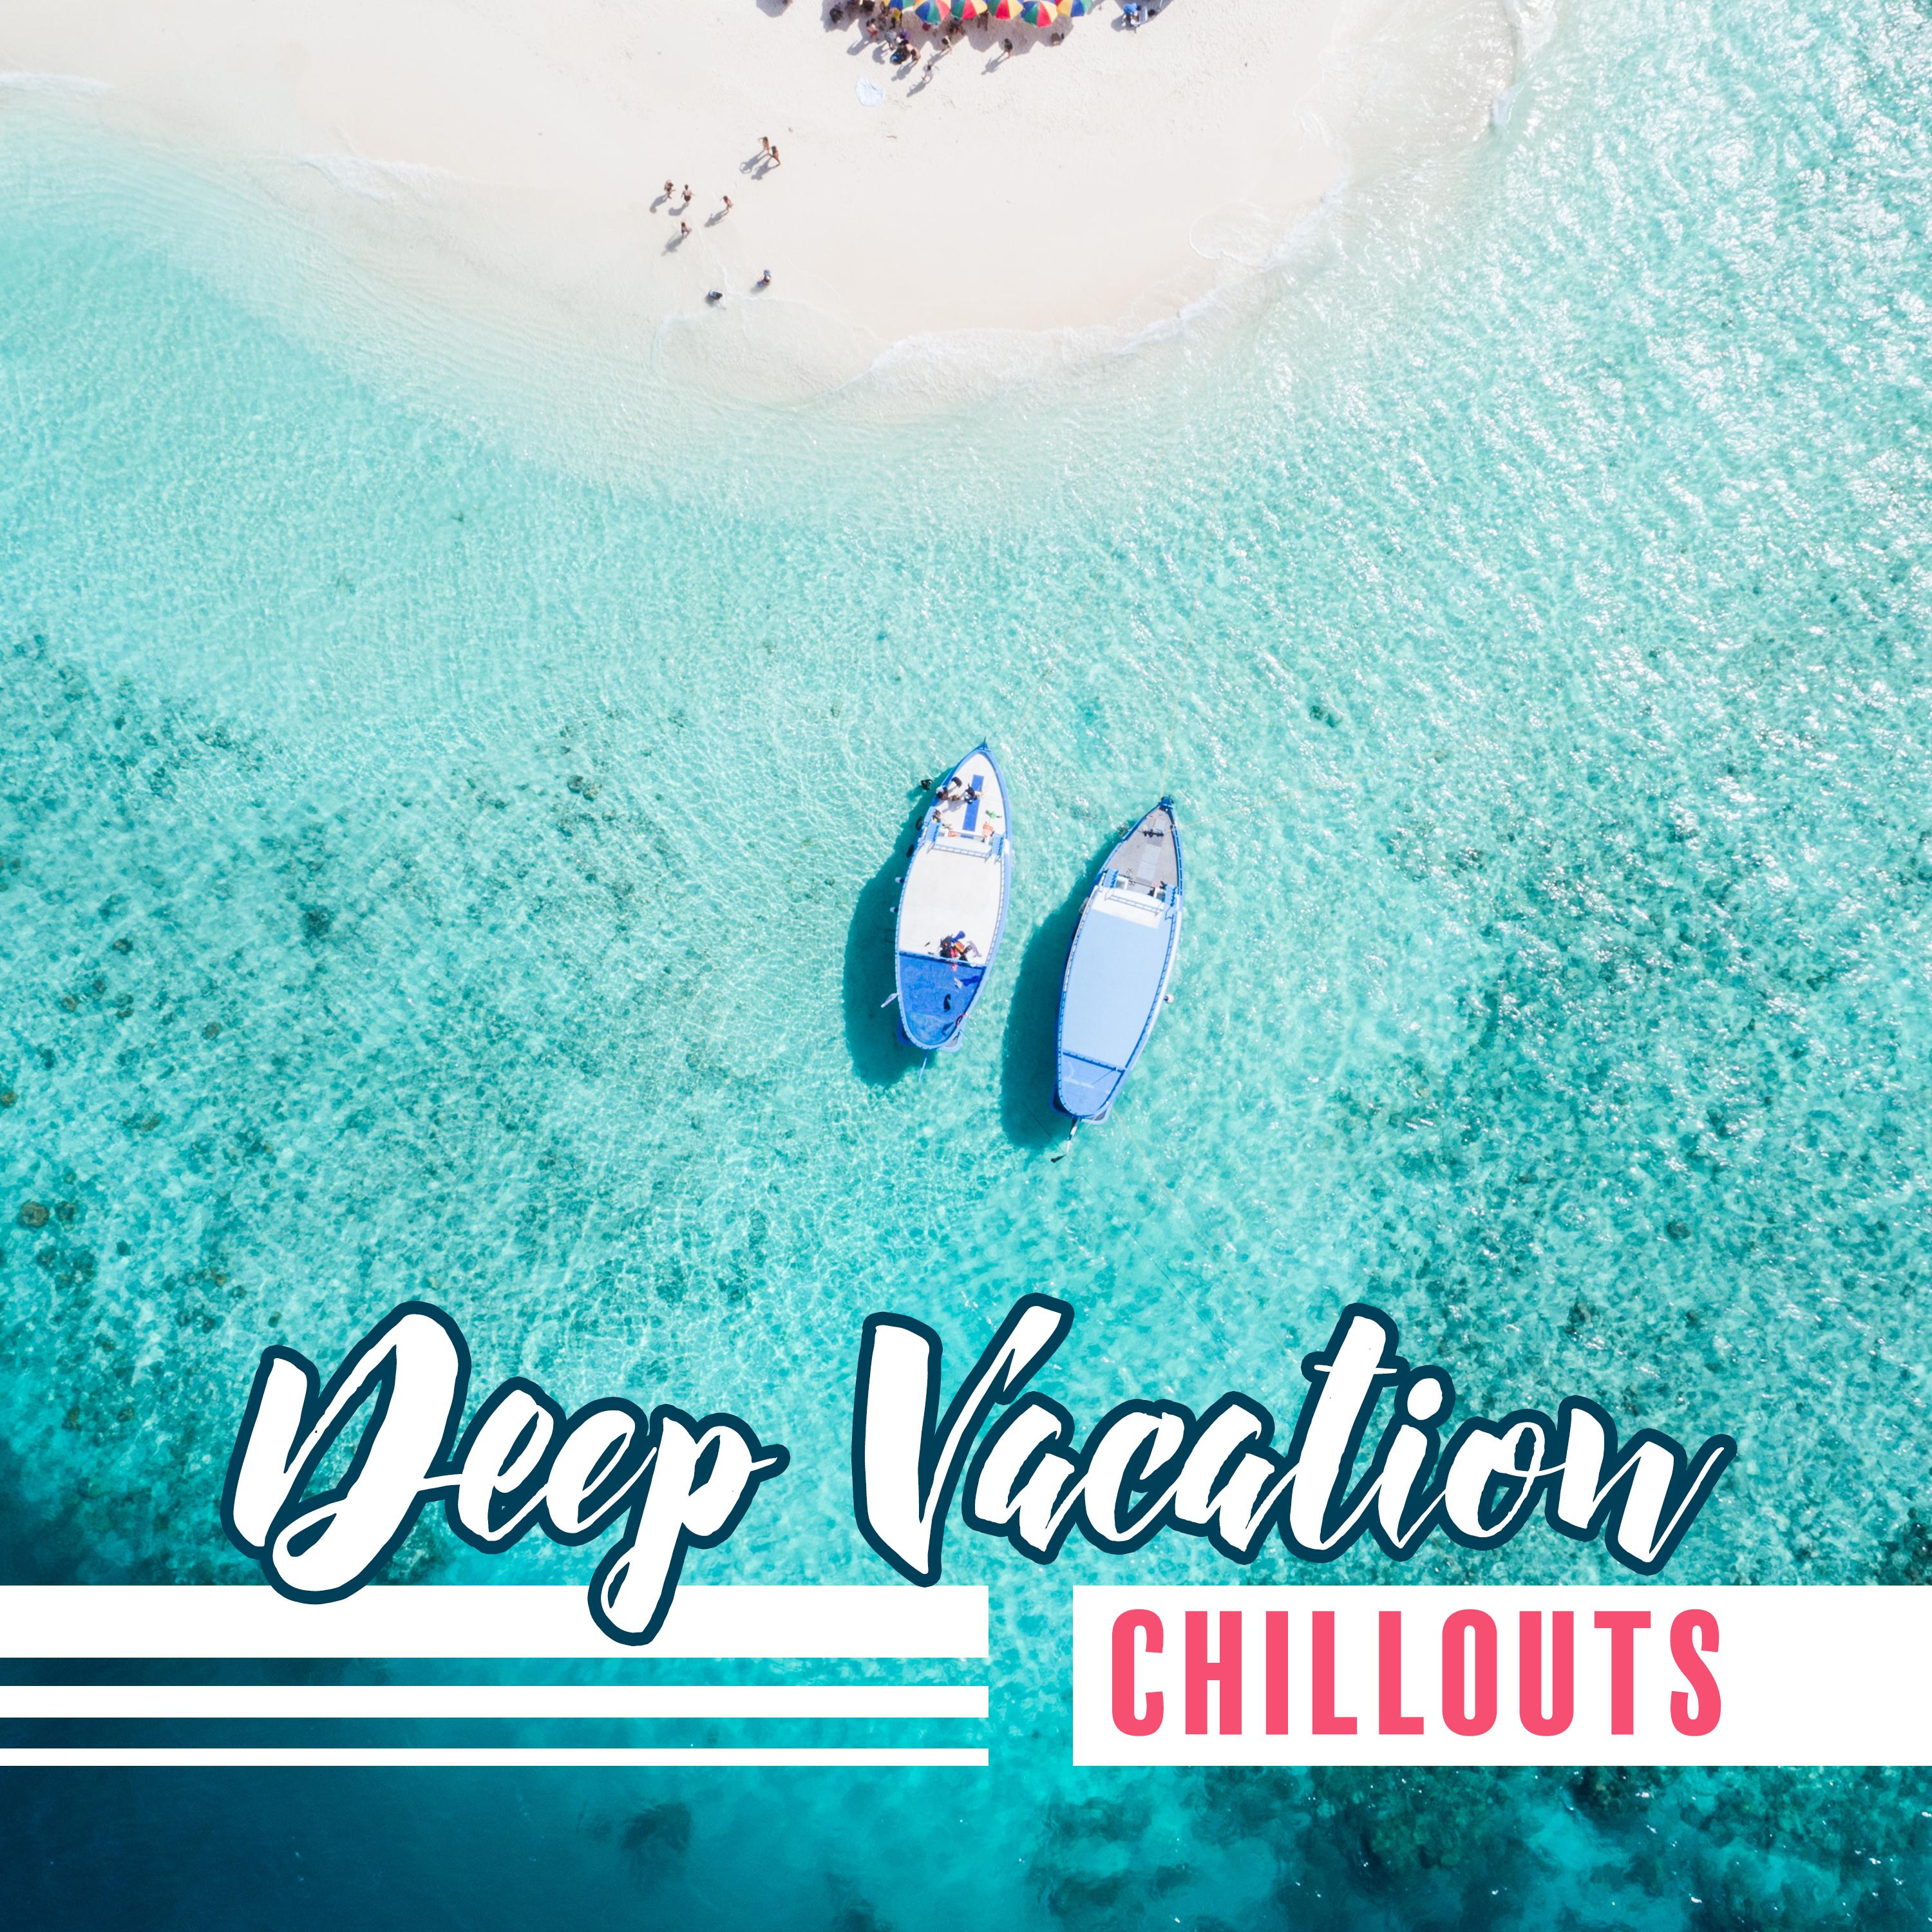 Deep Vacation Chillouts: 2019 Chill Out Music for Best Holiday Time Spending, Most Relaxing Sunny Ambient Deep Songs, Calm & Rest on the Beach